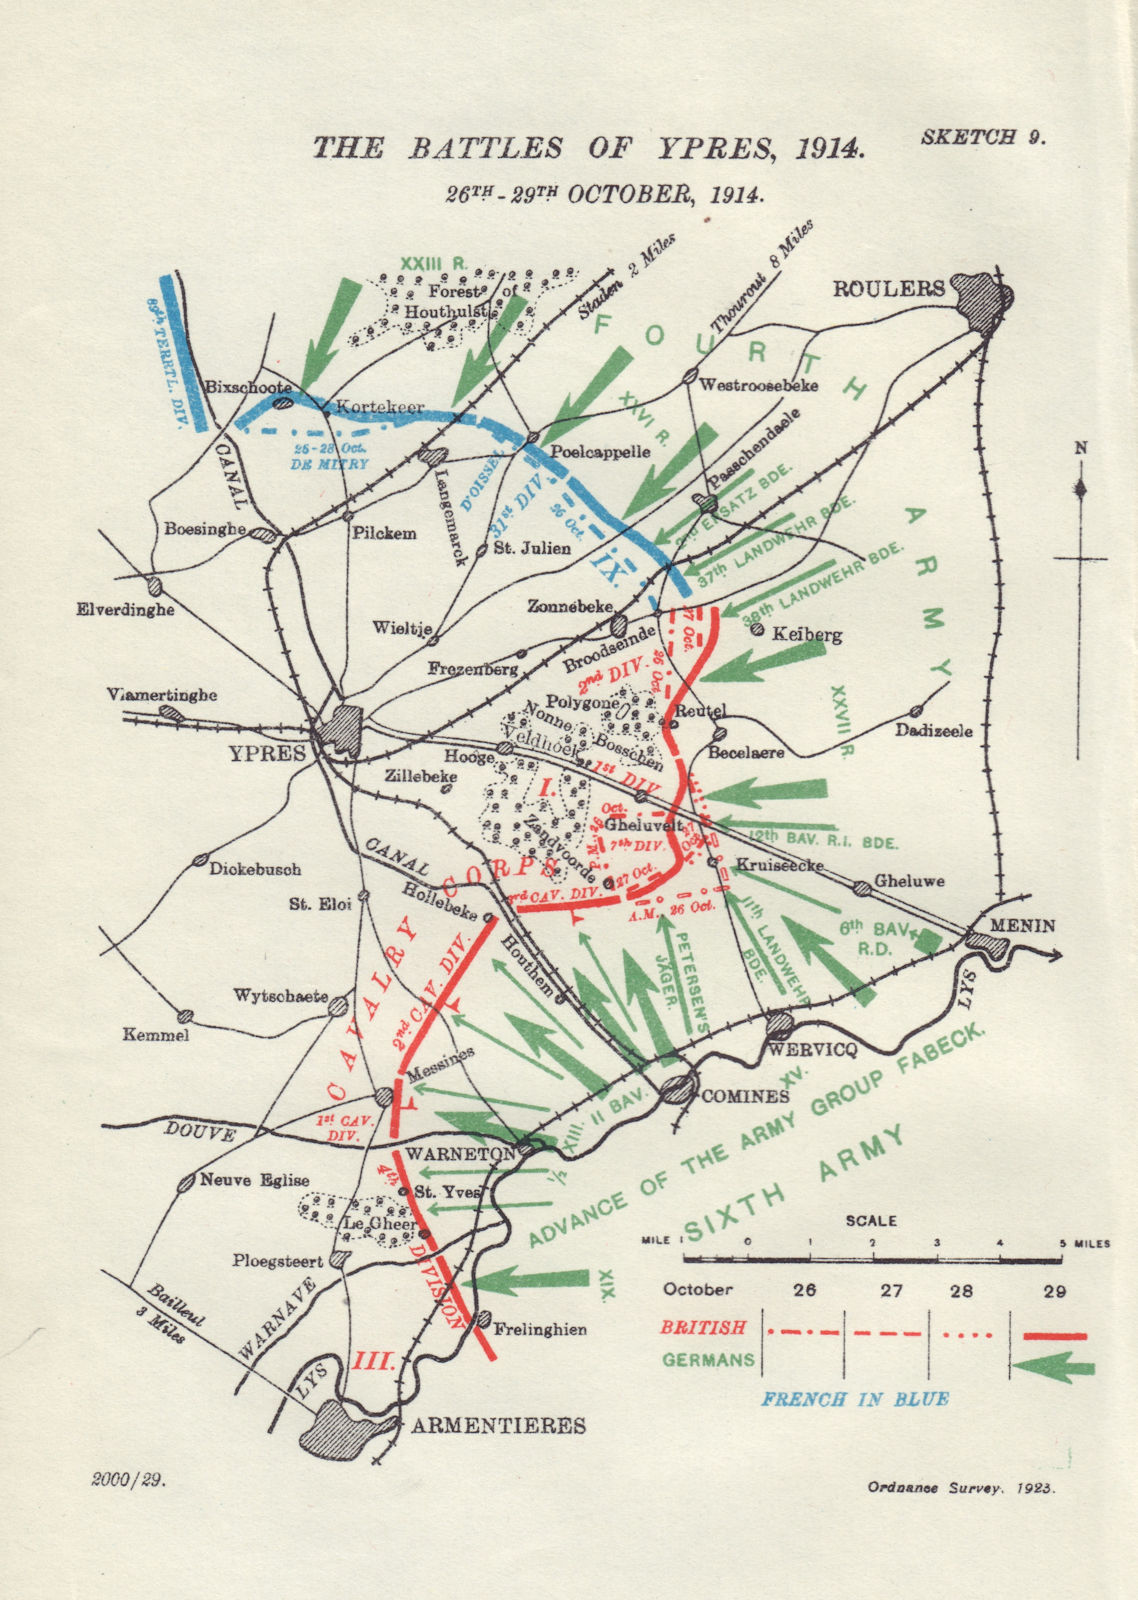 Associate Product Battle of Ypres, 26th-29th October, 1914. First World War. 1925 old map